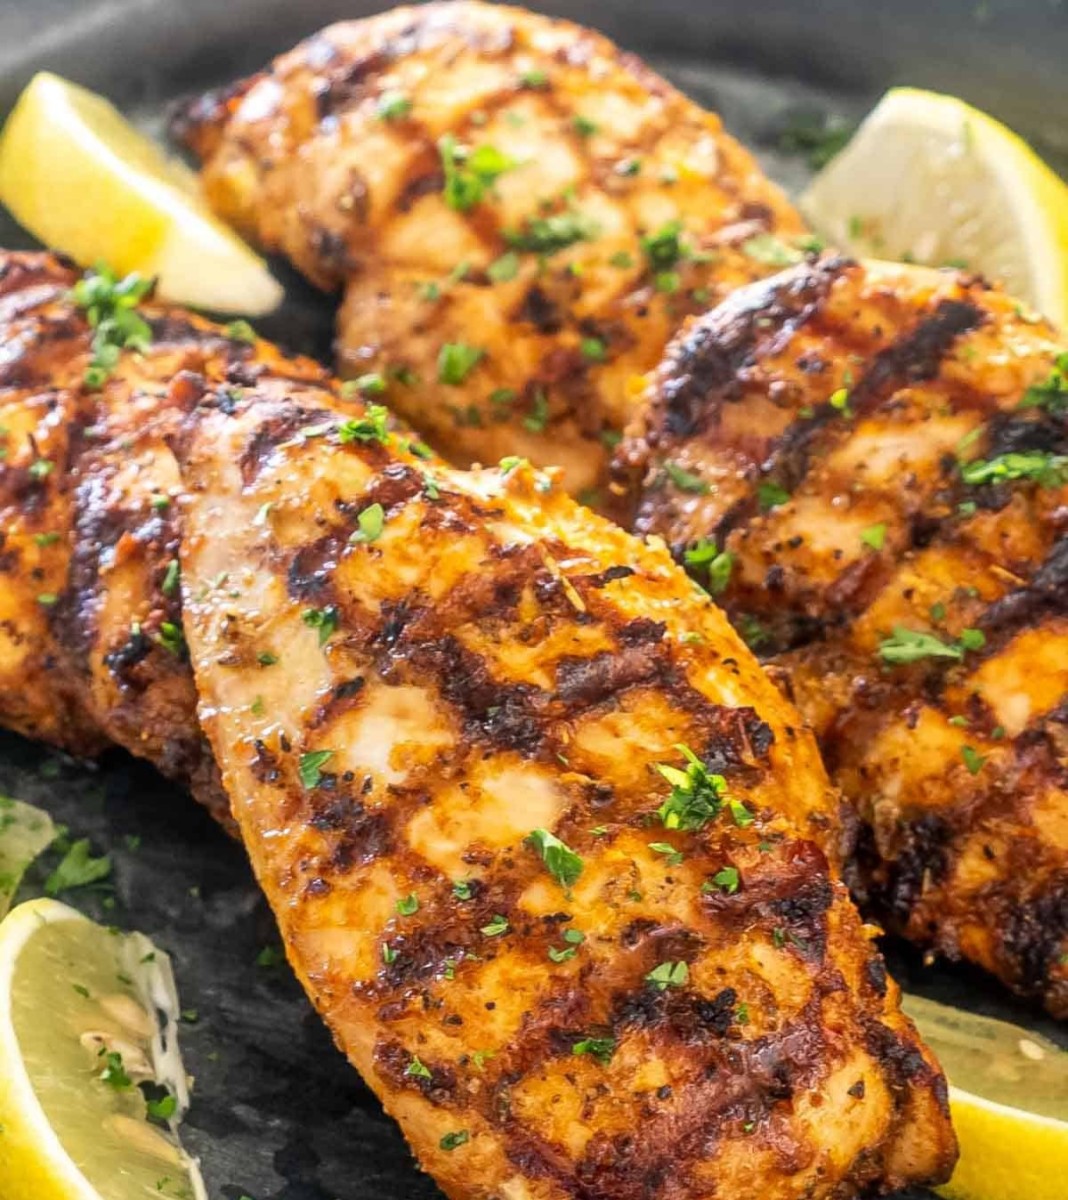 Grilled Chicken Recipes for Lunch